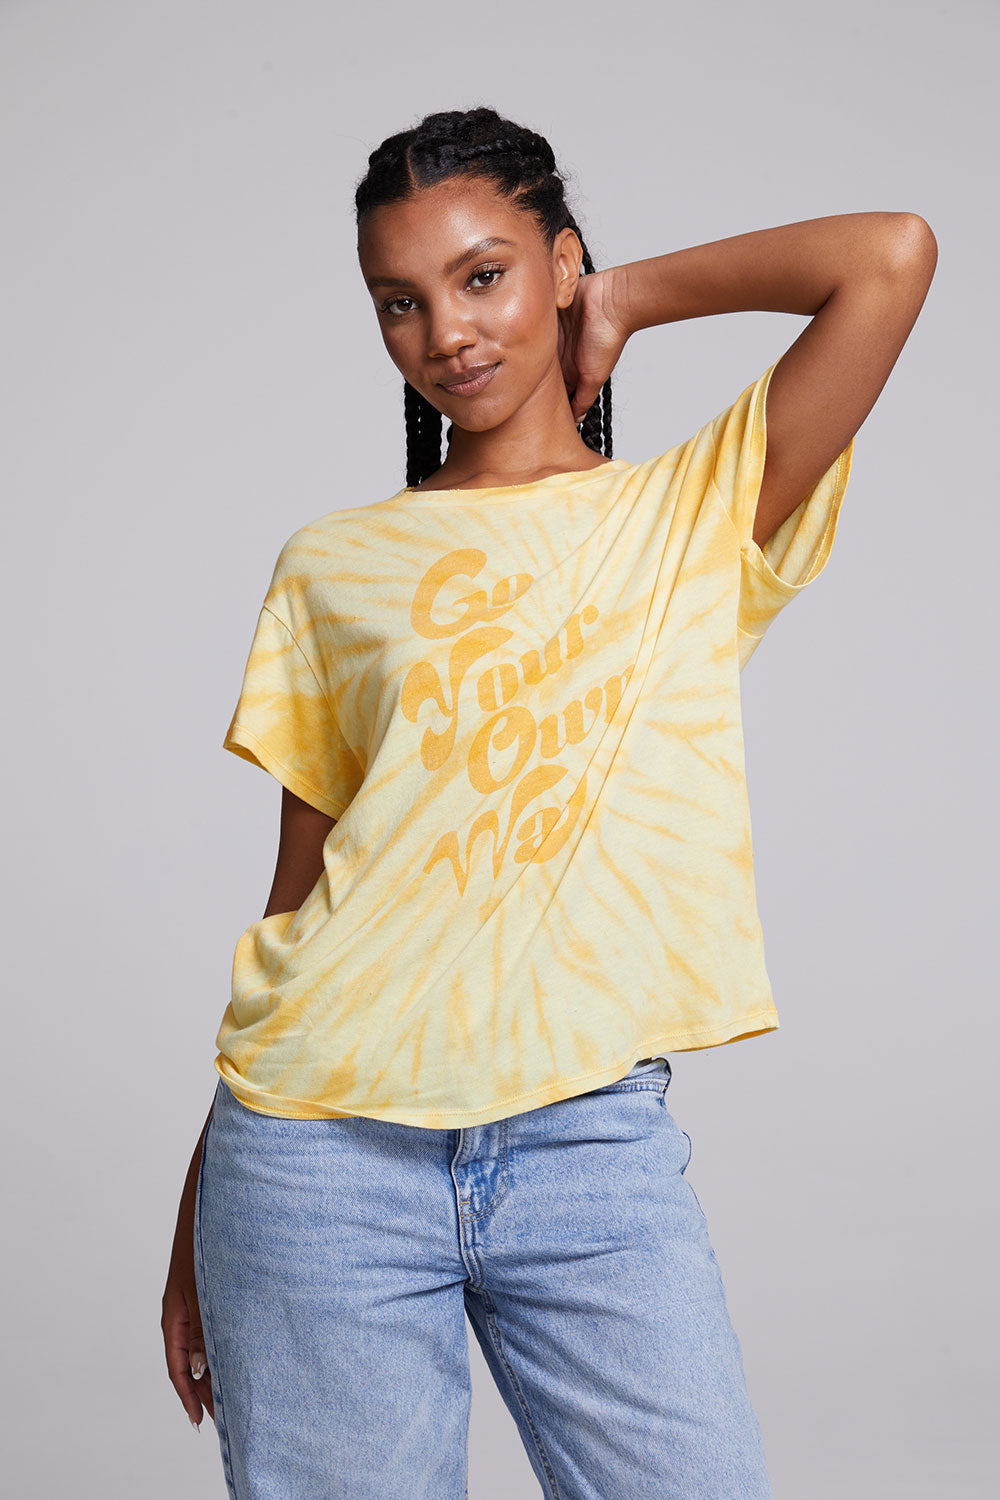 Go Your Own Way Crew Neck Tee WOMENS chaserbrand